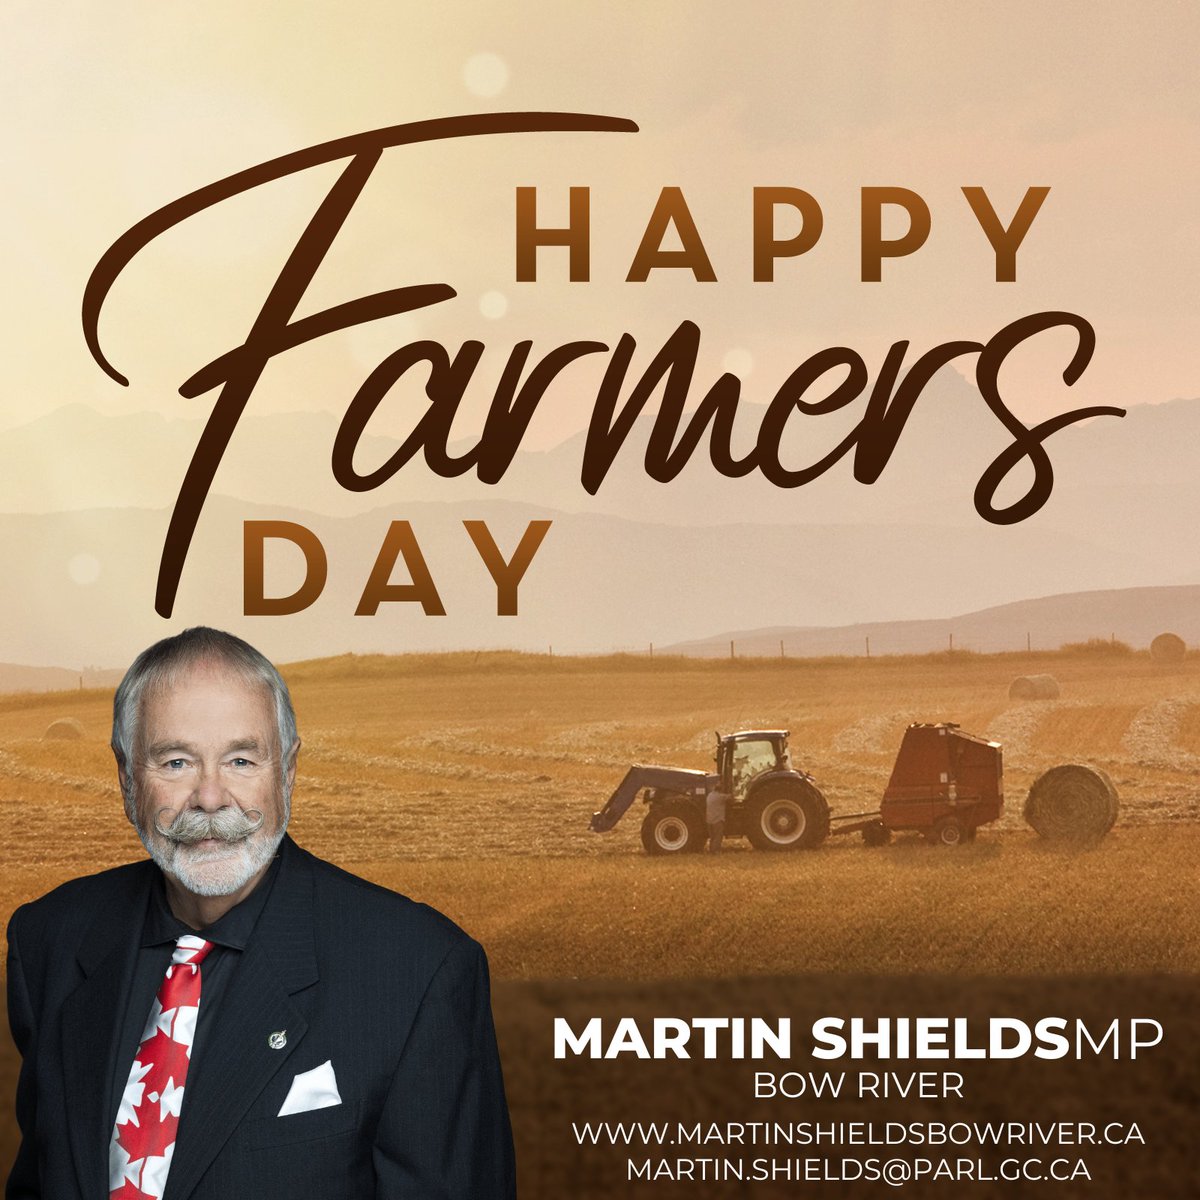 Today we celebrate the farmers that work hard to put food on the table of every single Canadian across the country. Your hard work feeds the country and the world. Today and every day, we say thank you! #FarmersDay #BowRiver